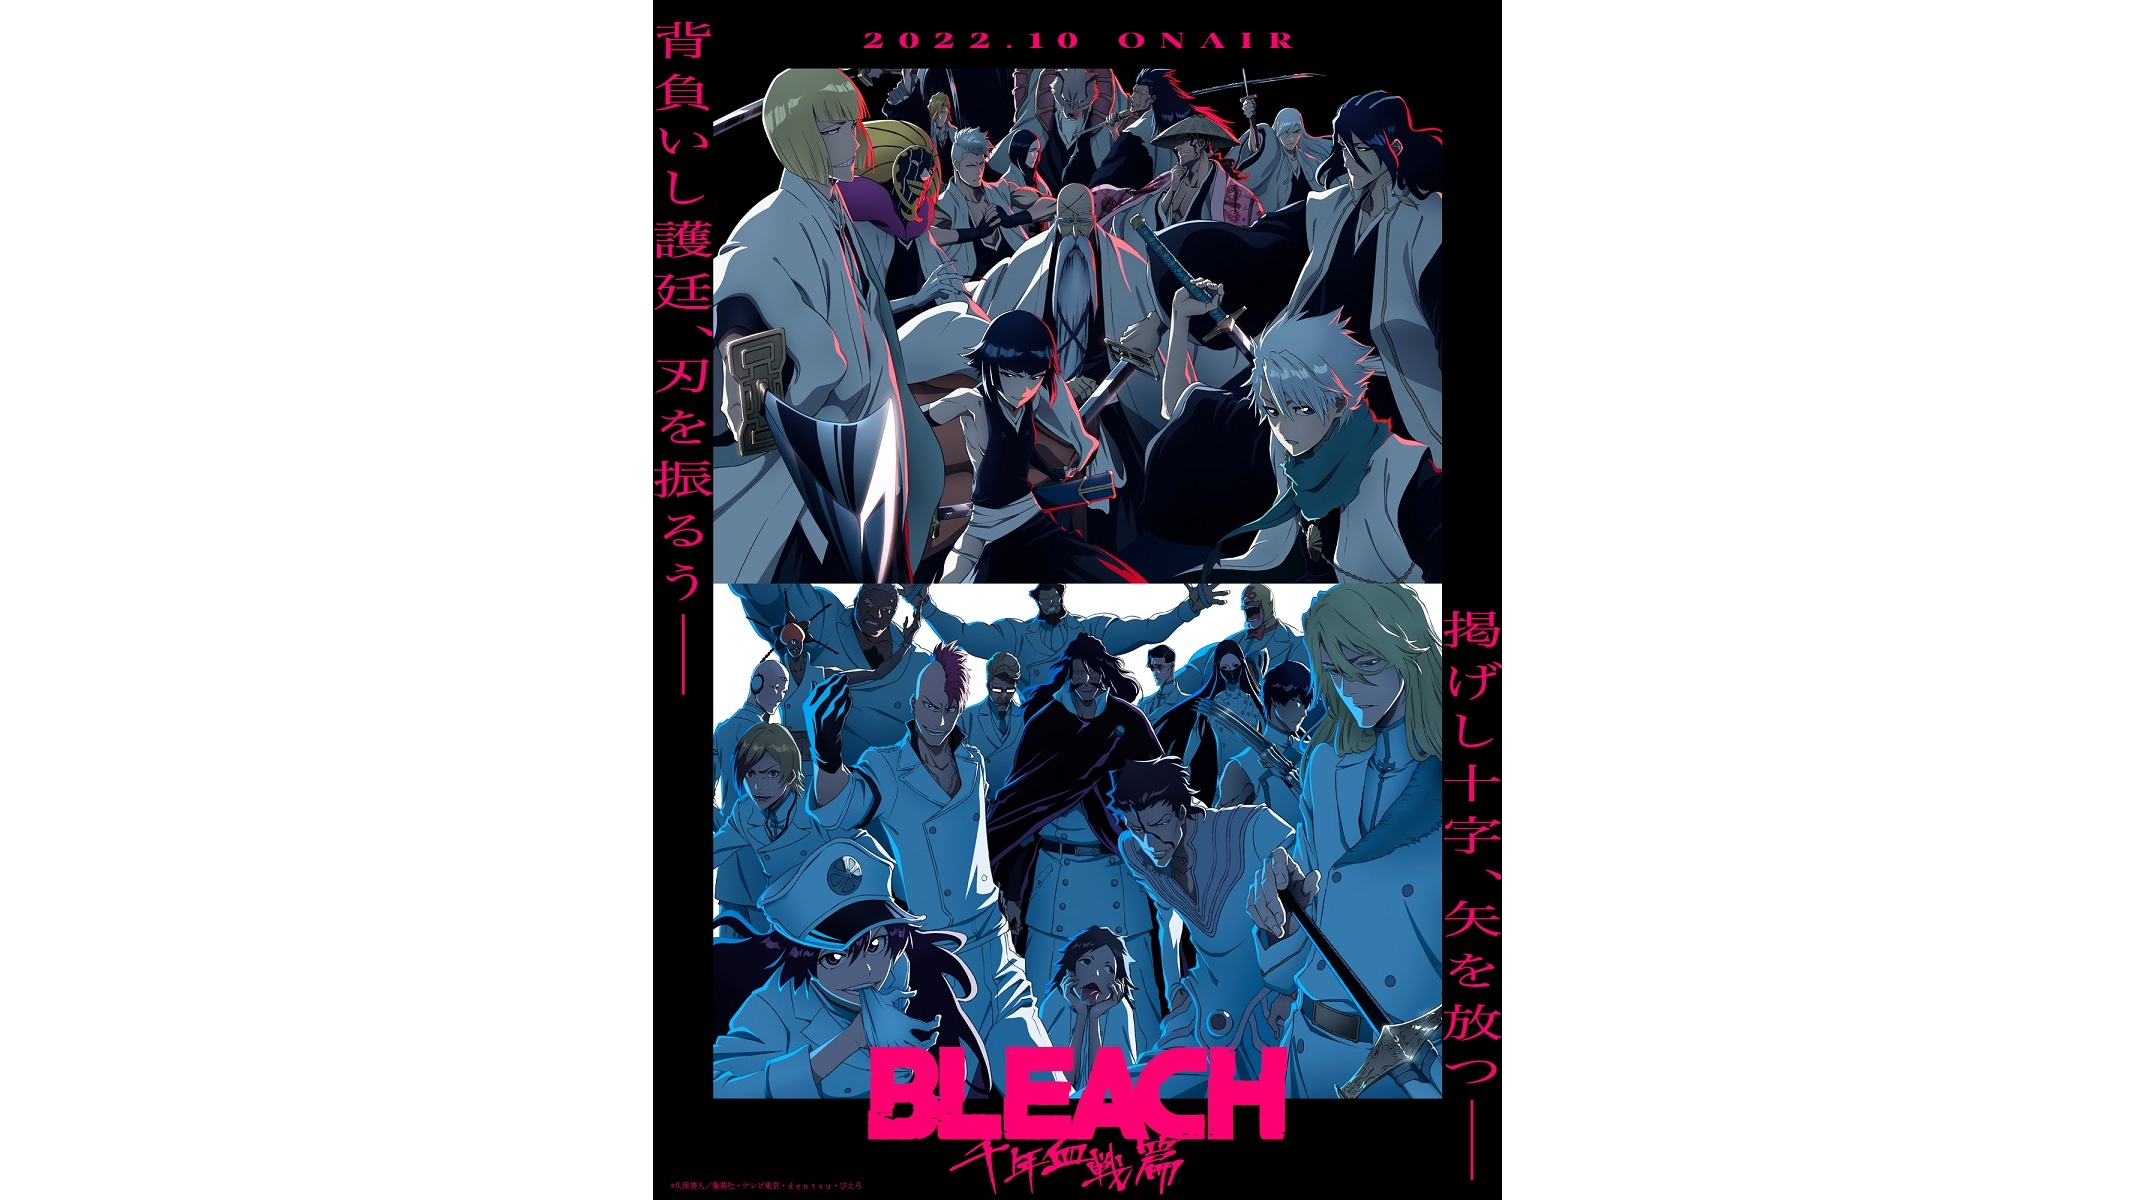 Bleach: Thousand-Year Blood War' Has Reached the Top of the Charts